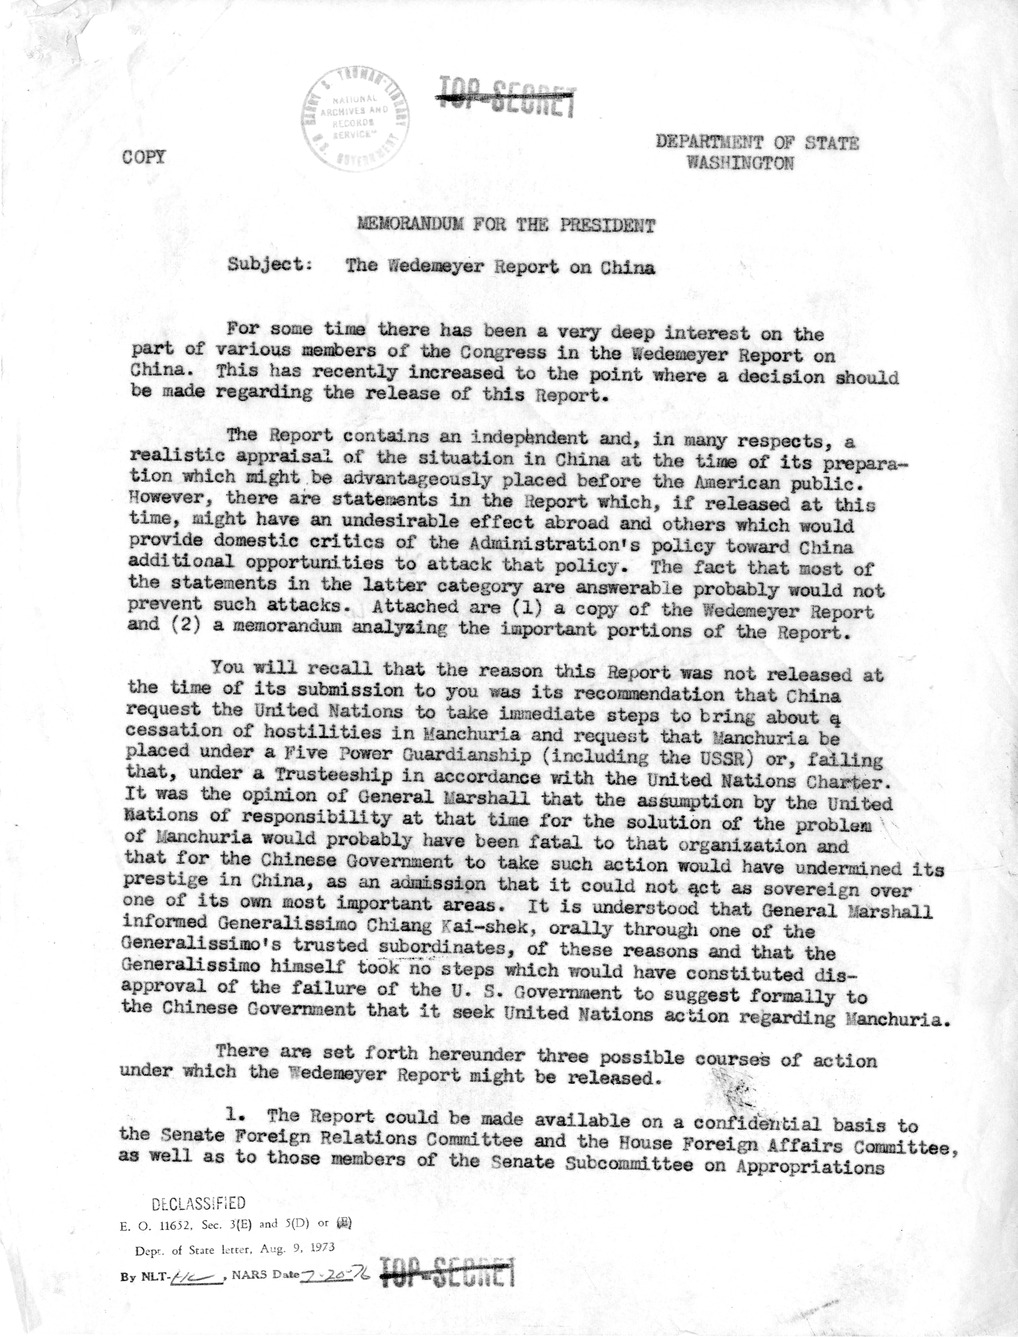 Memorandum from Clark Clifford to Secretary of State Dean Acheson, with Attachment